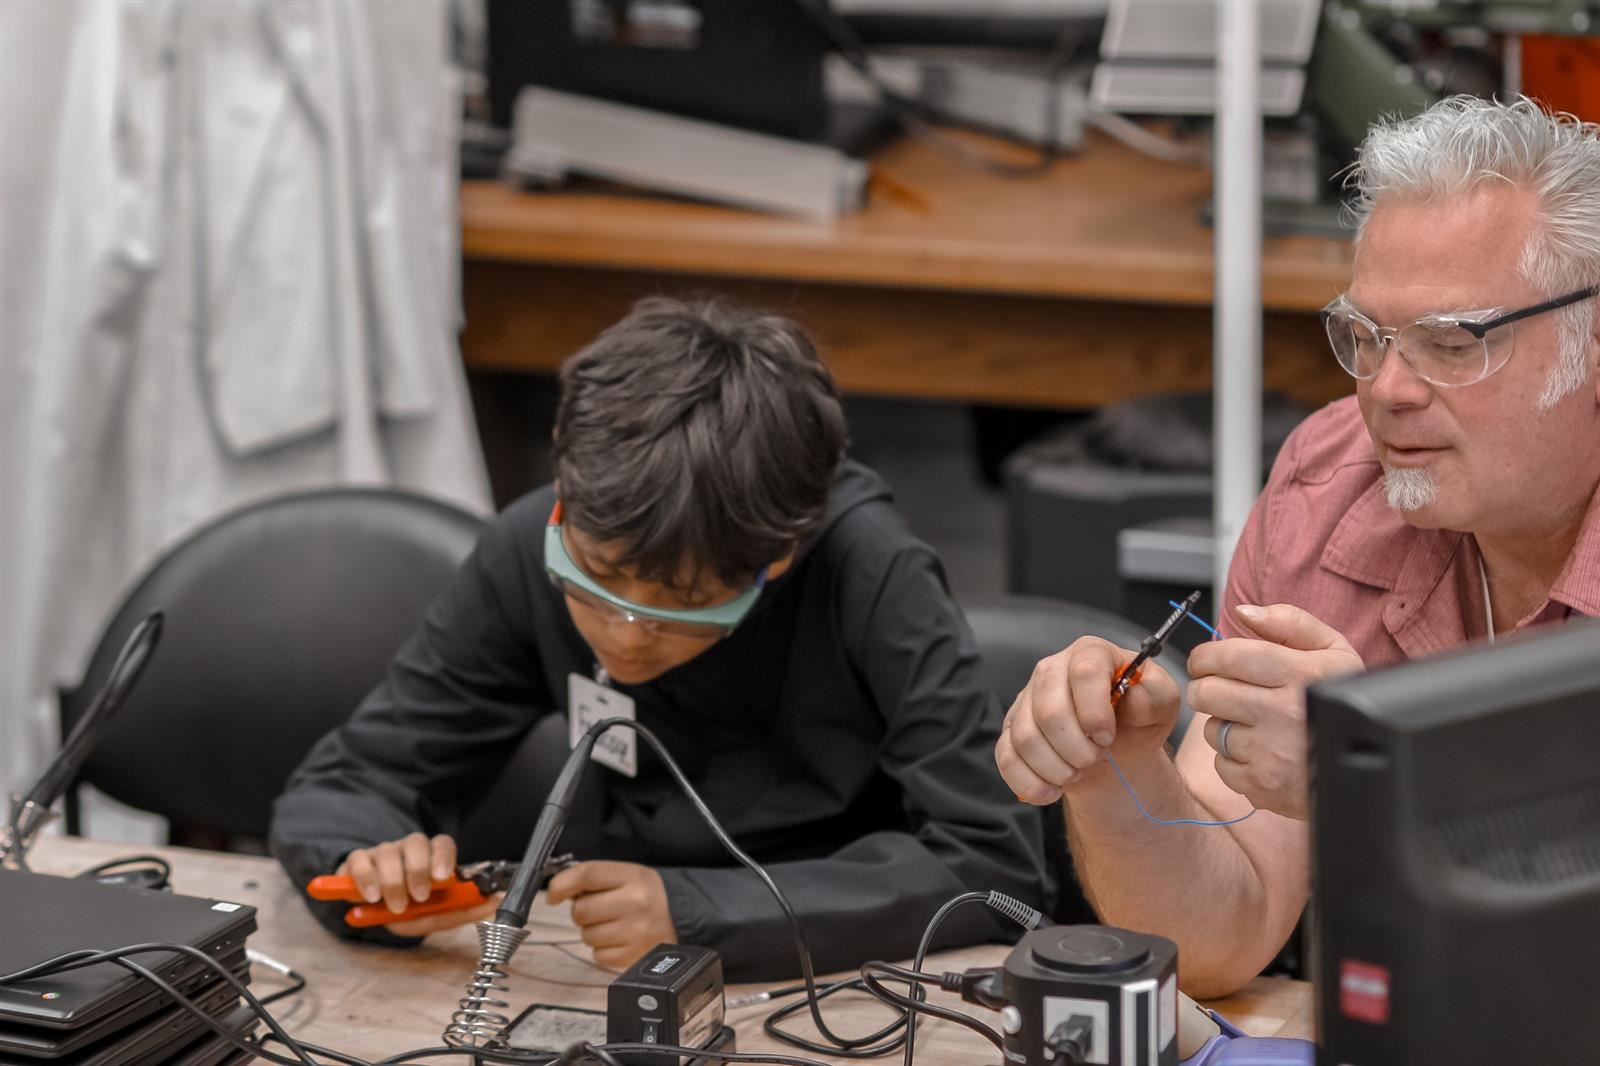  Mechatronics Engineering teacher Jim Burnham works with a student during middle school camp